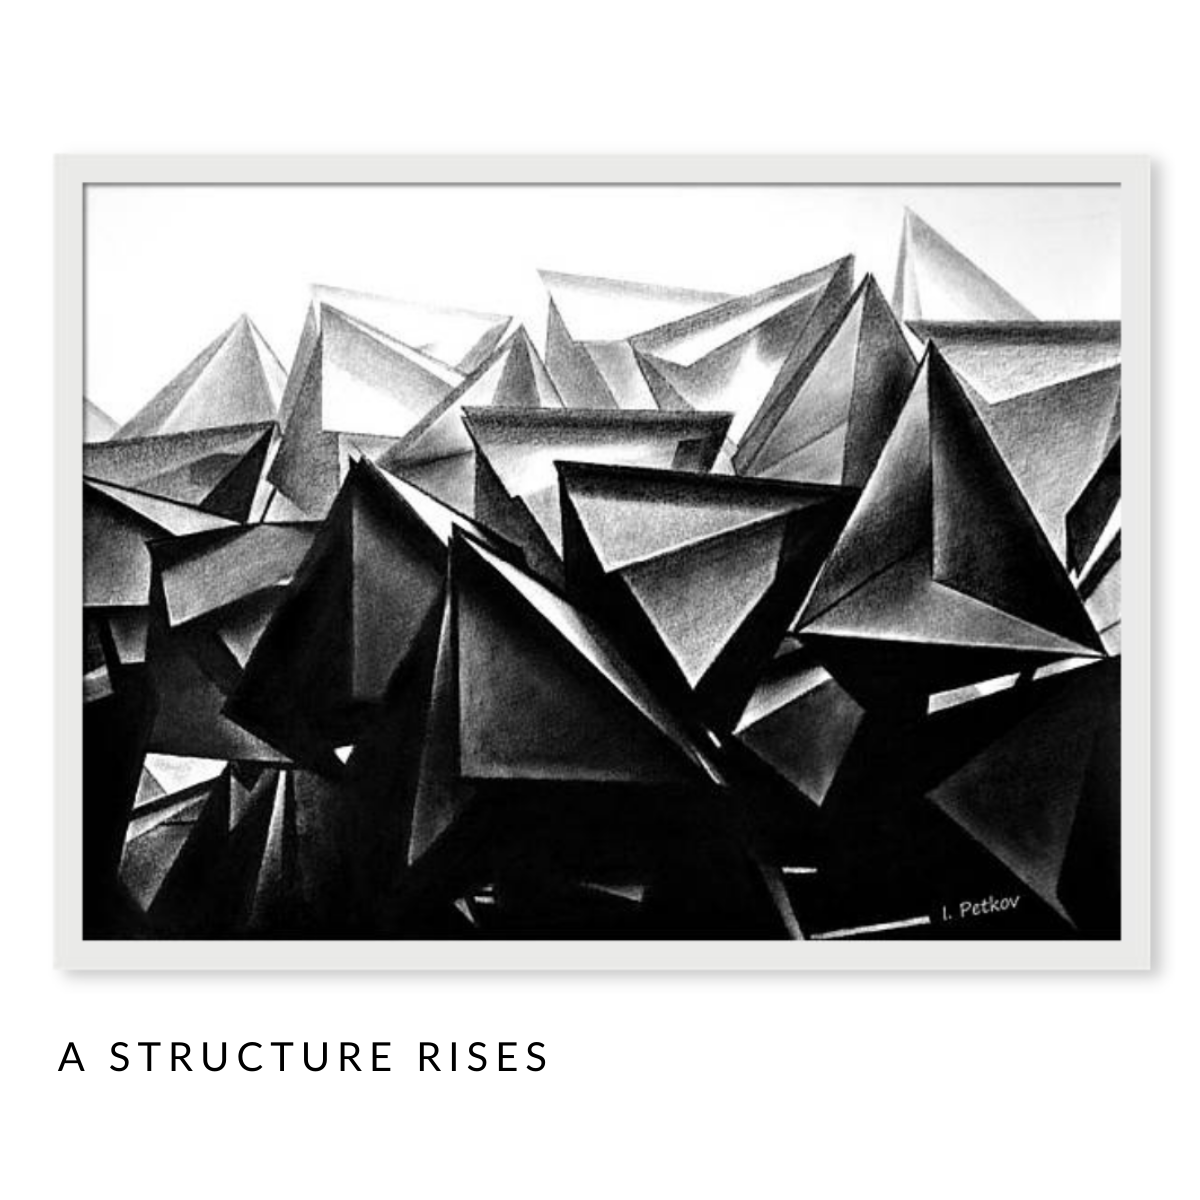 The Abridged Structures Art Series - Set of 5 Black and White Pastel Drawings